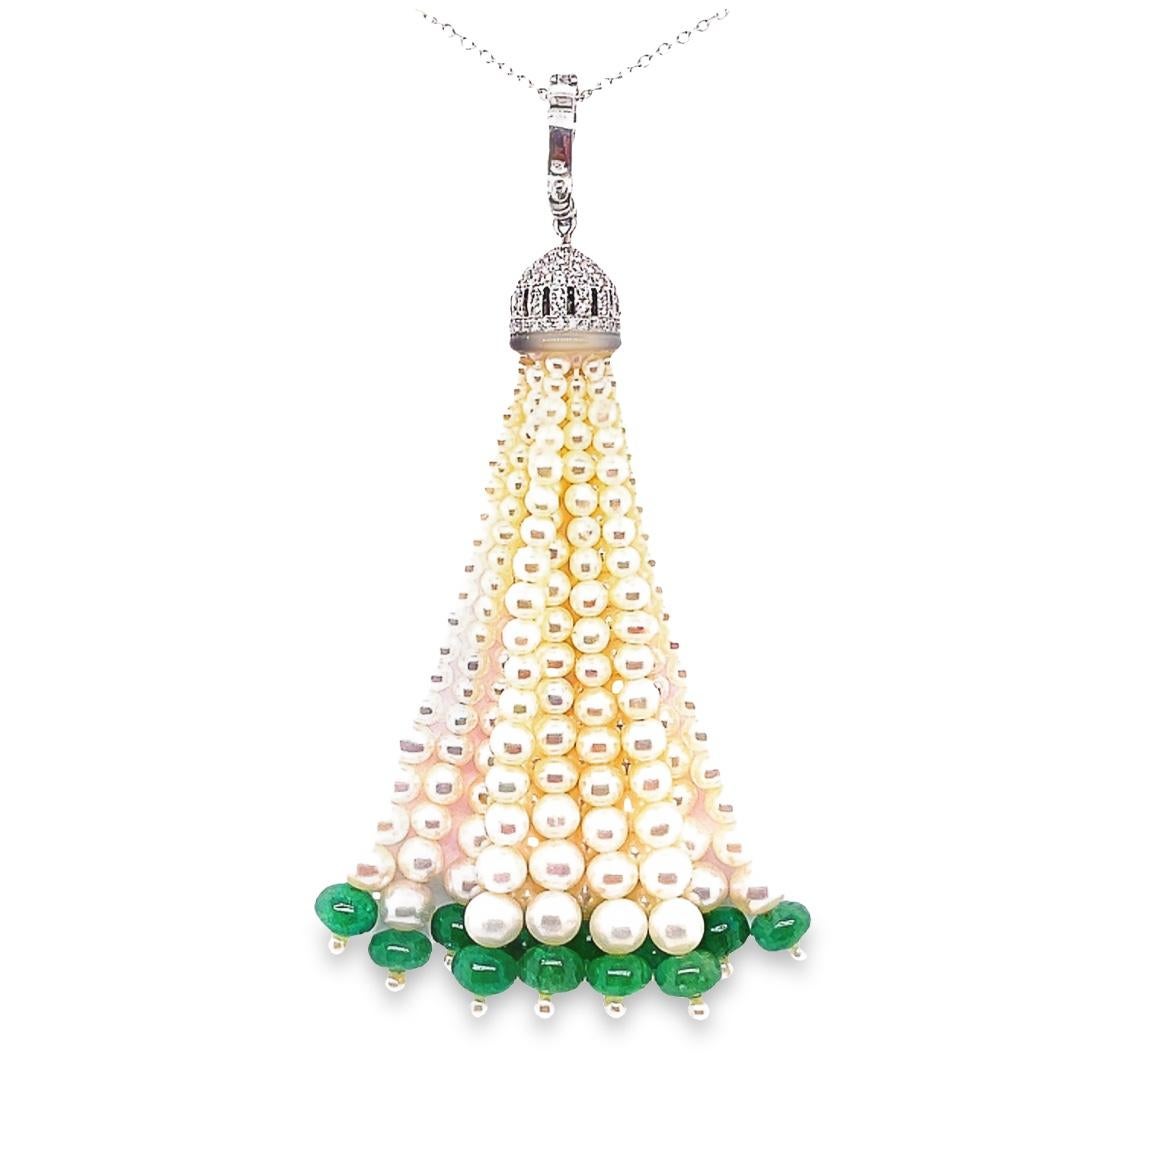 At the heart of this mesmerizing creation are freshwater pearls, descending gracefully from delicate to medium-sized and culminating in impressively large pearls totaling 11.79 carats.

Scientifically proven to be among nature's finest creations,